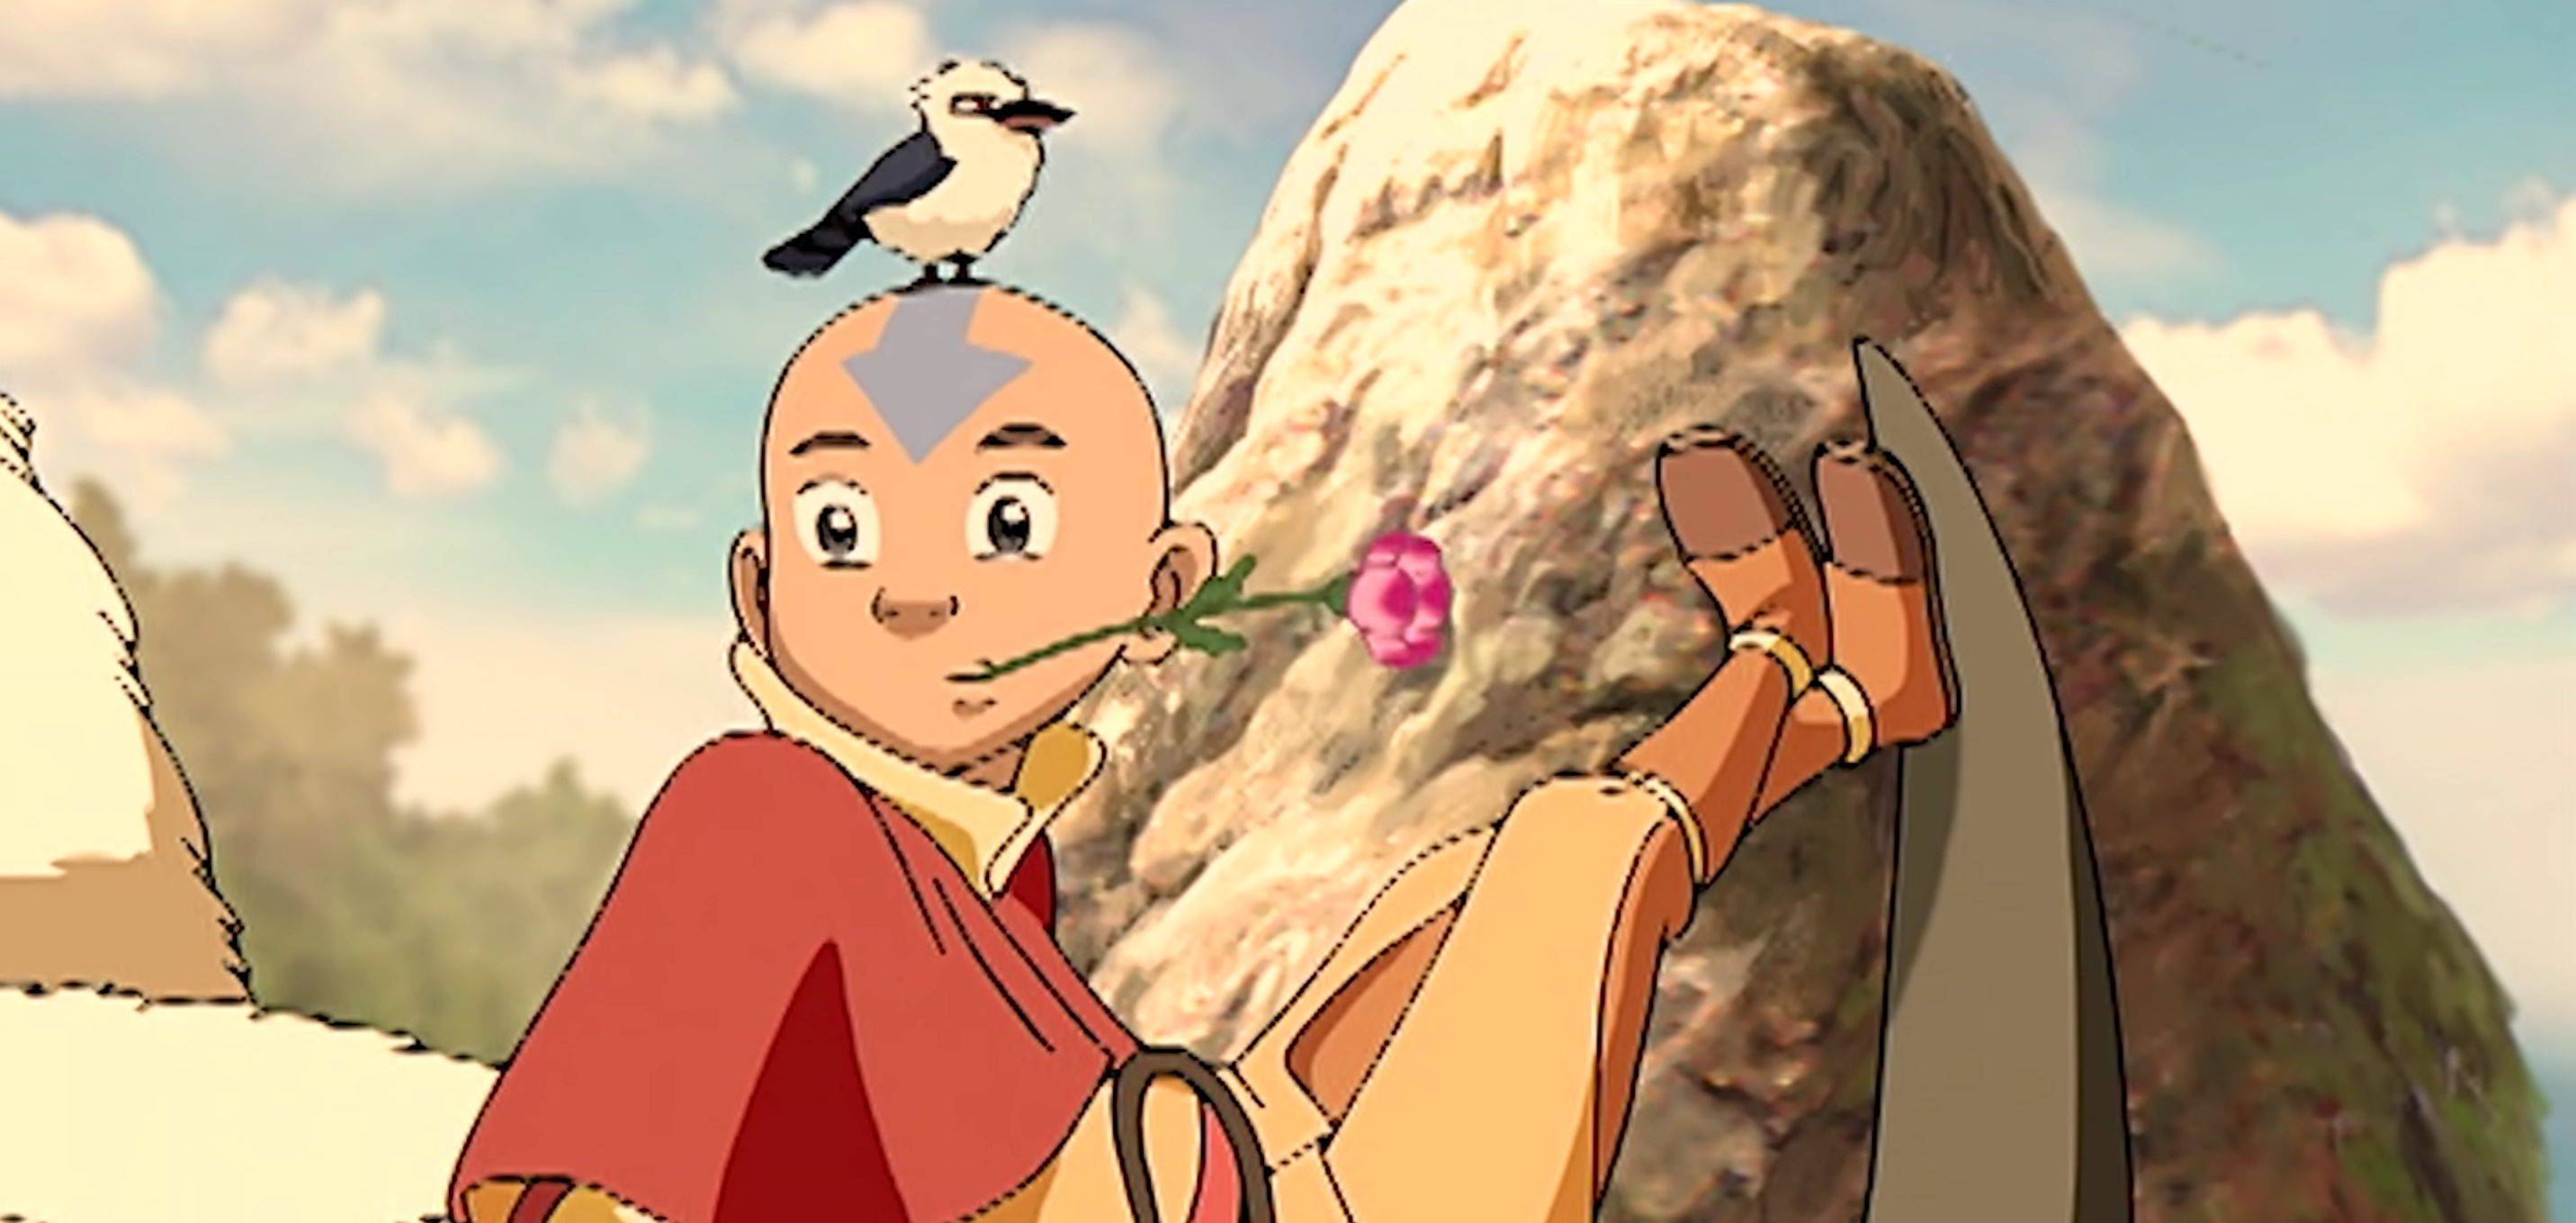 Avatar the last airbender unaired pilot